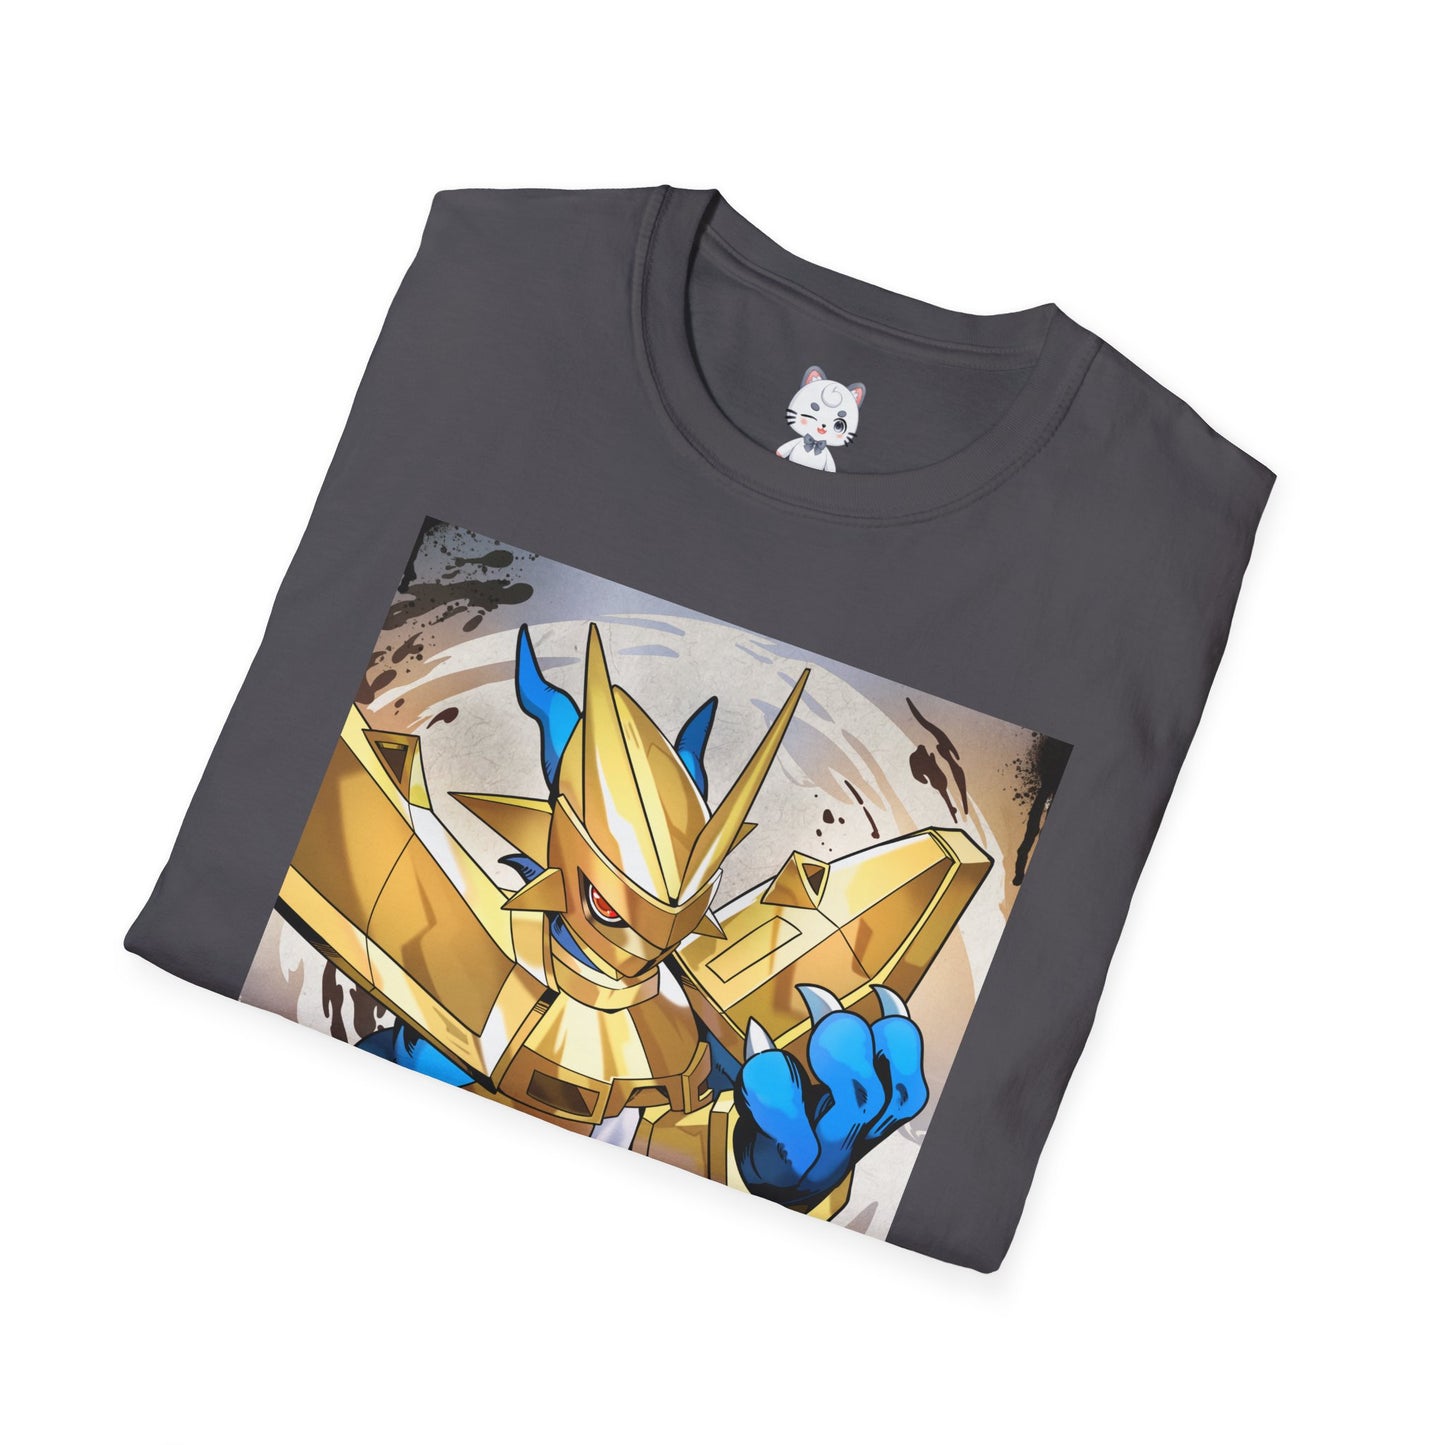 Digimon Magnamon T-Shirt Design by Currynoodleart